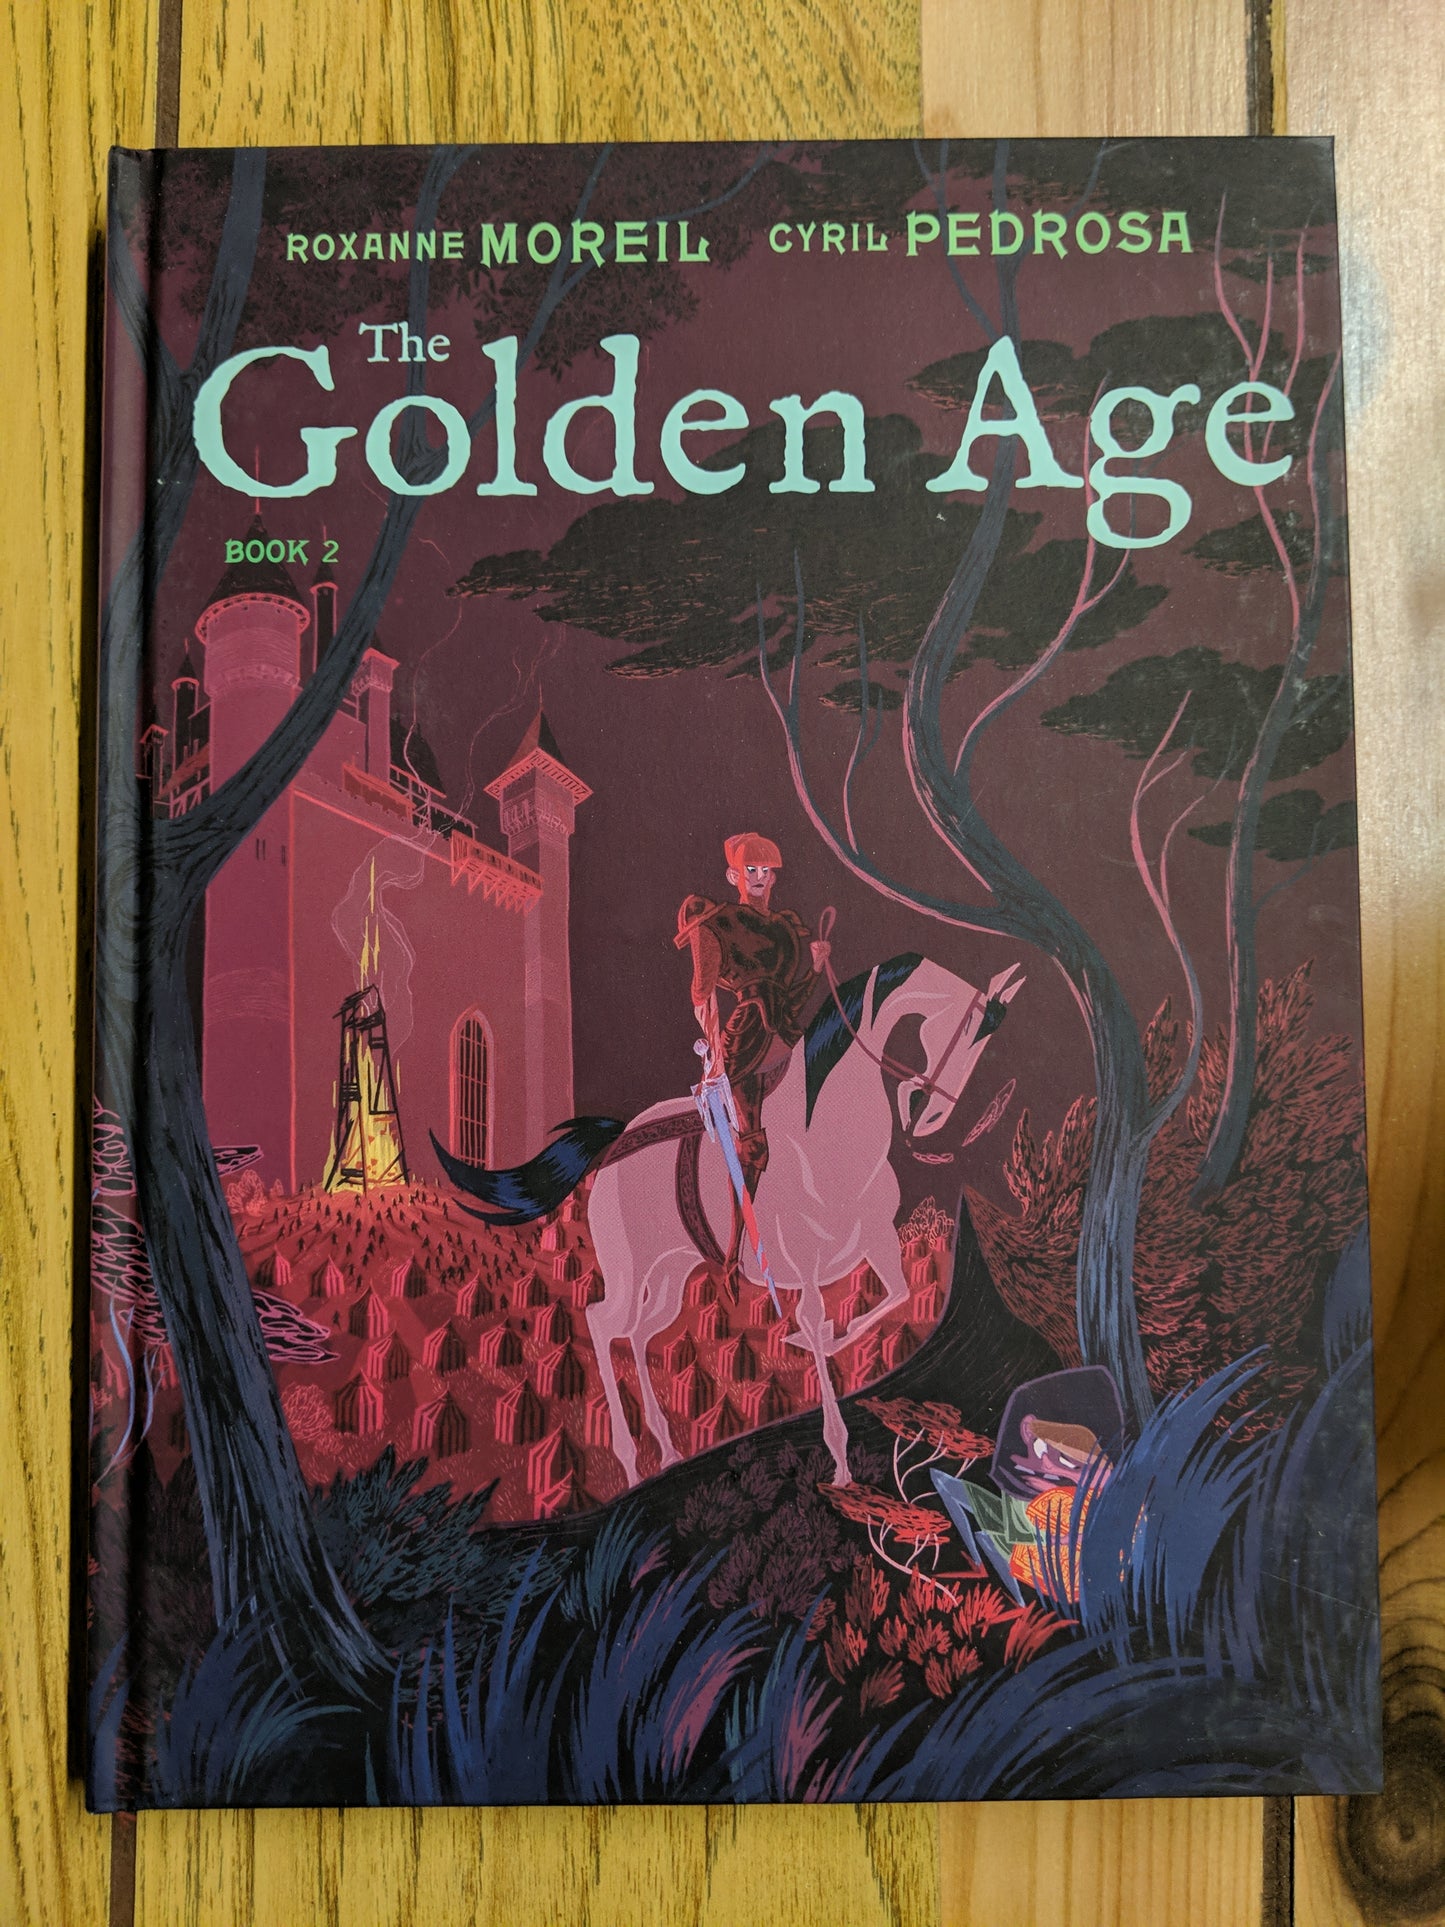 The Golden Age Book 2